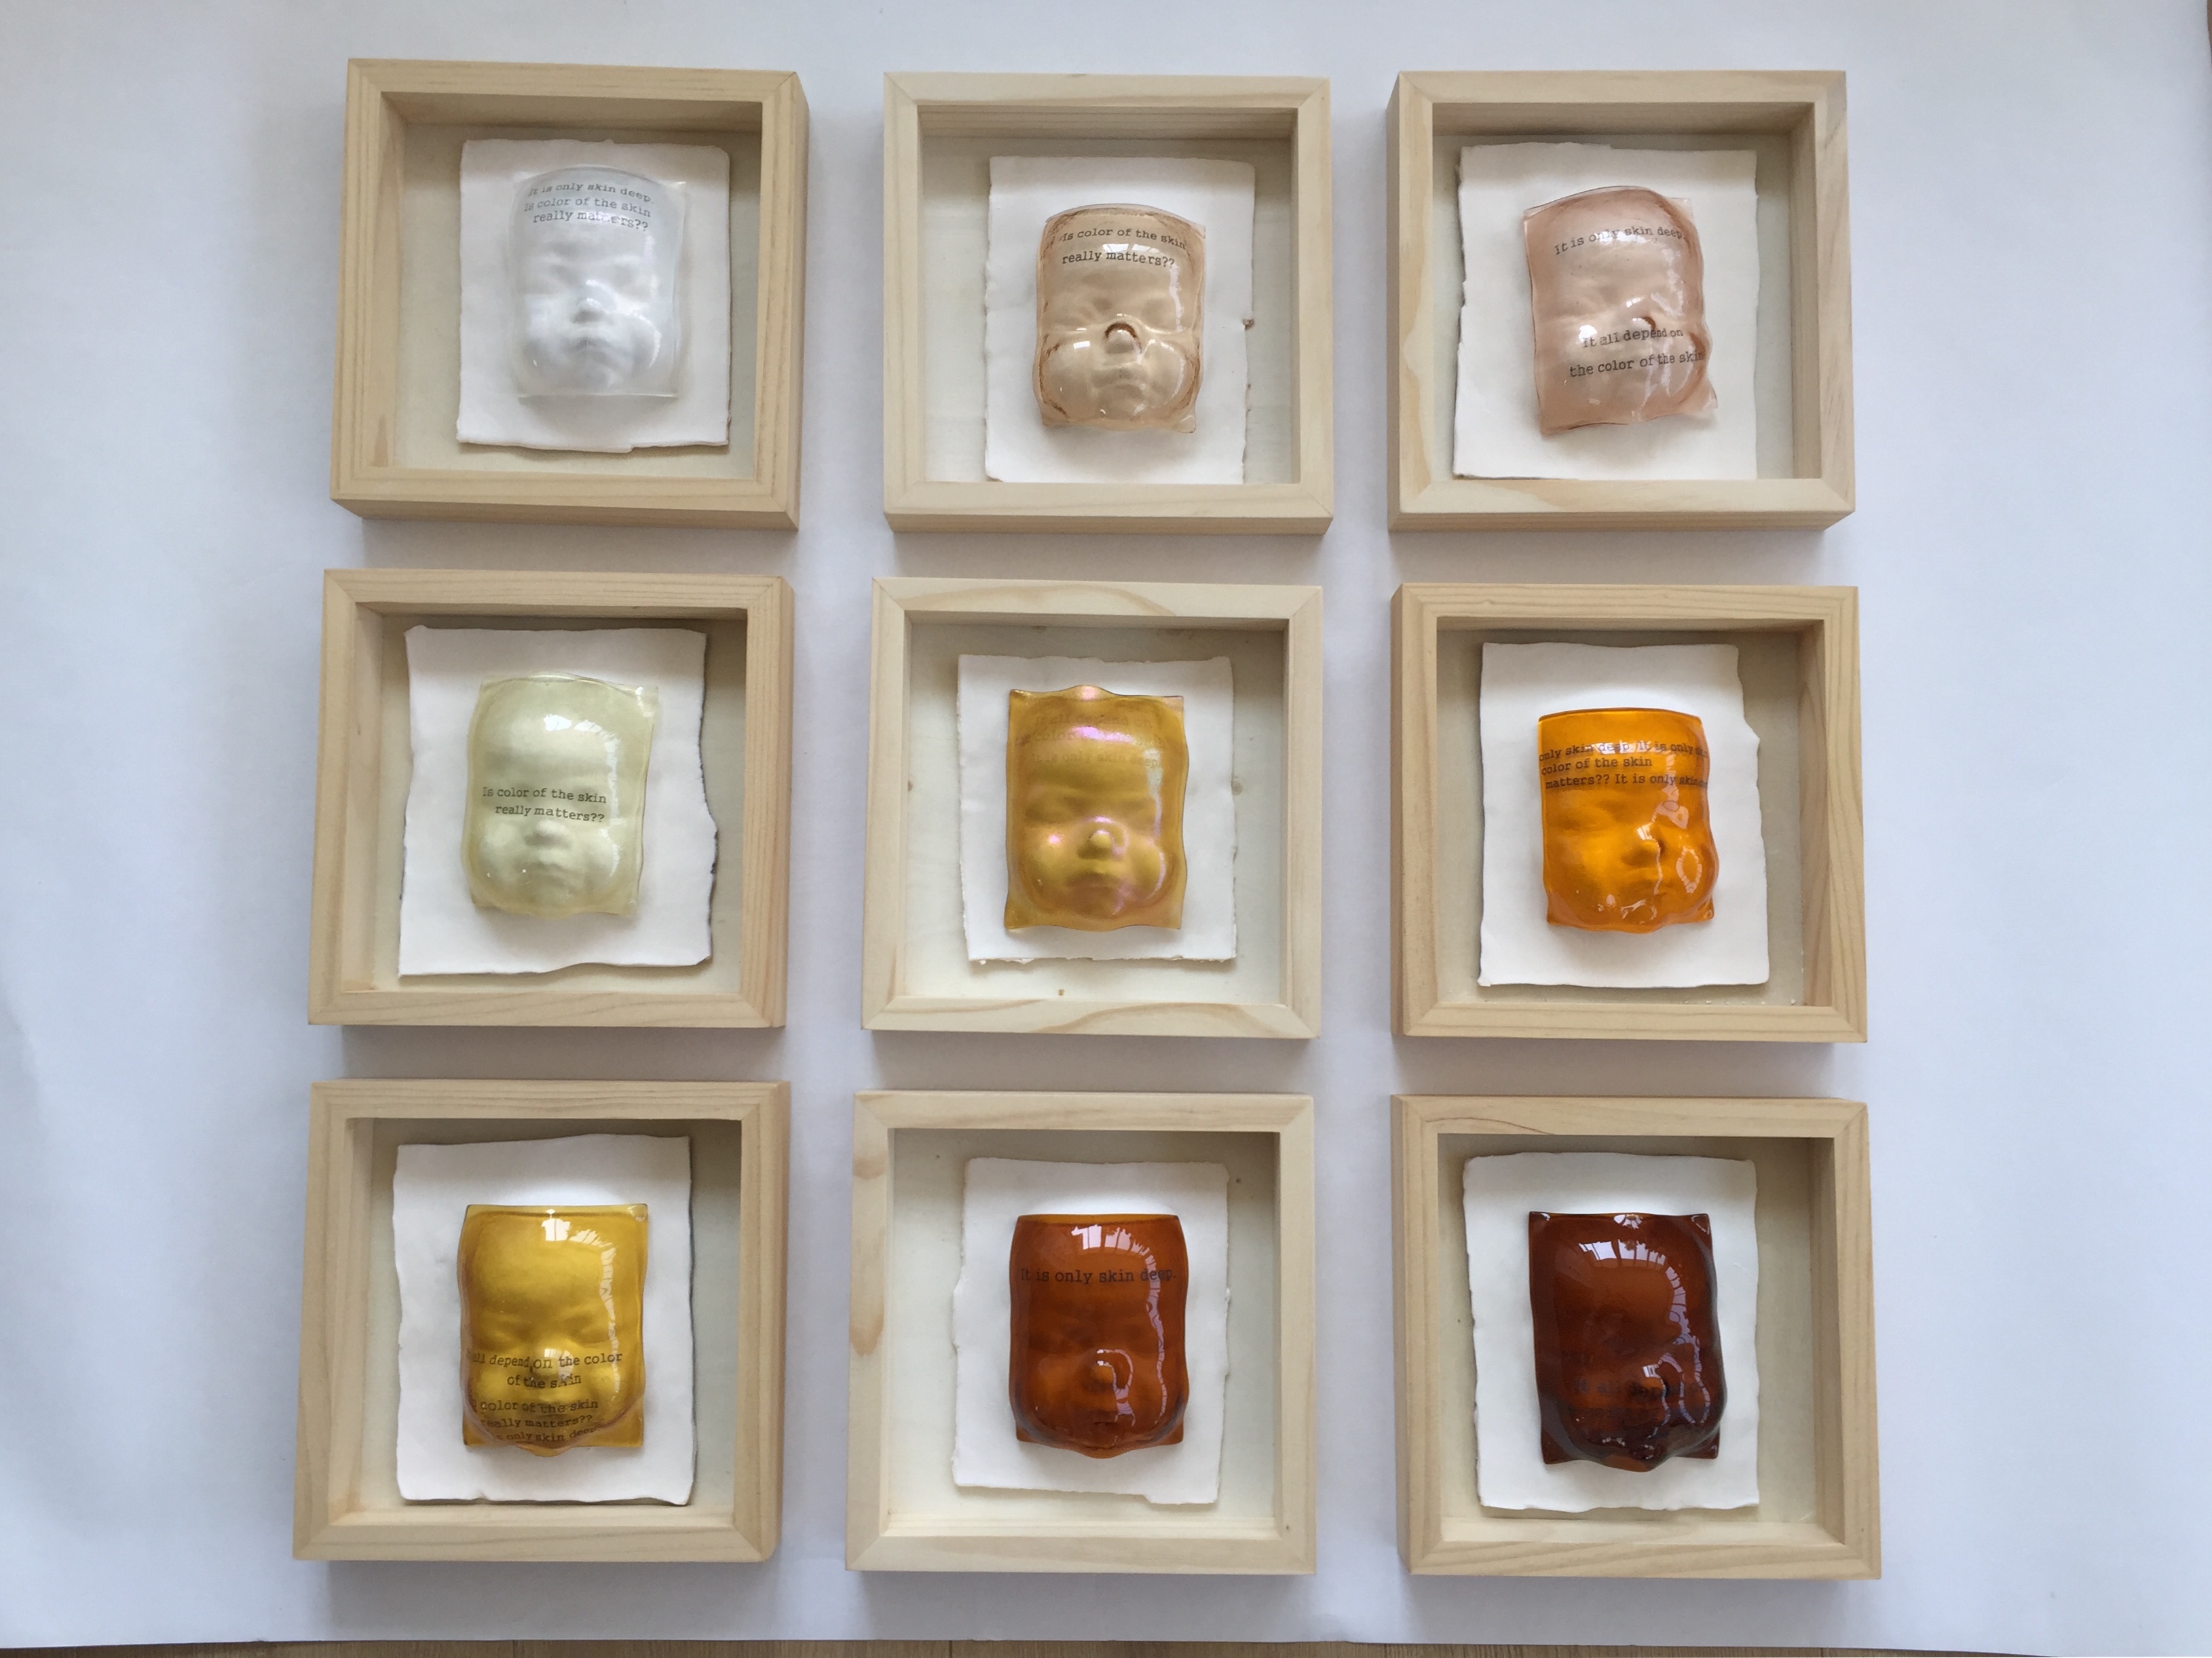 2) Yoonchung “yc” Park Kim-Does the color of the skin matter 2019 Porcelain and glass 28 x 28 x 2.jpg